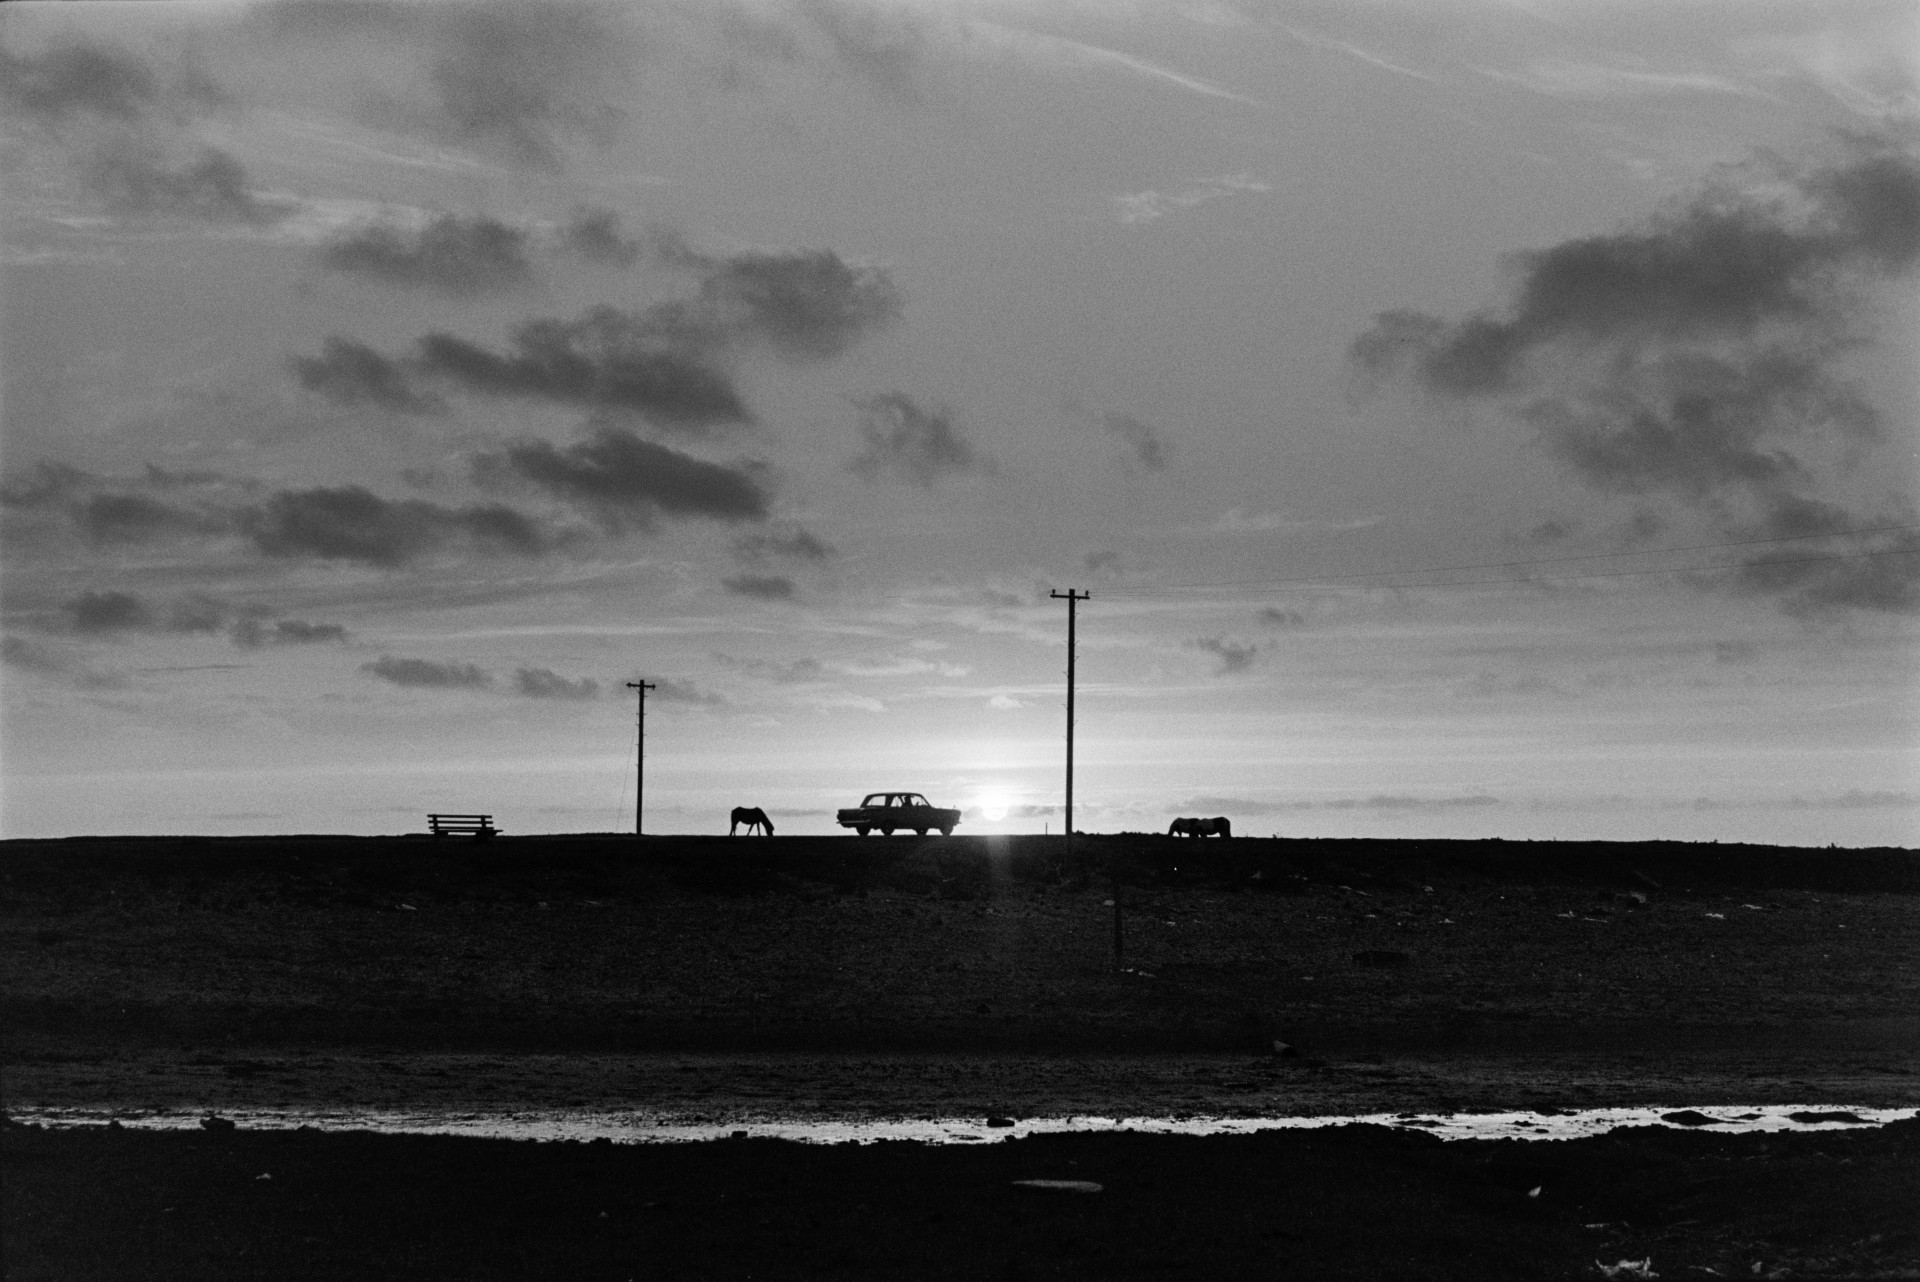 A horse grazing by a bench, electricity poles and a parked car silhouetted on the skyline, at Westward Ho! Clouds are visible in the sky.